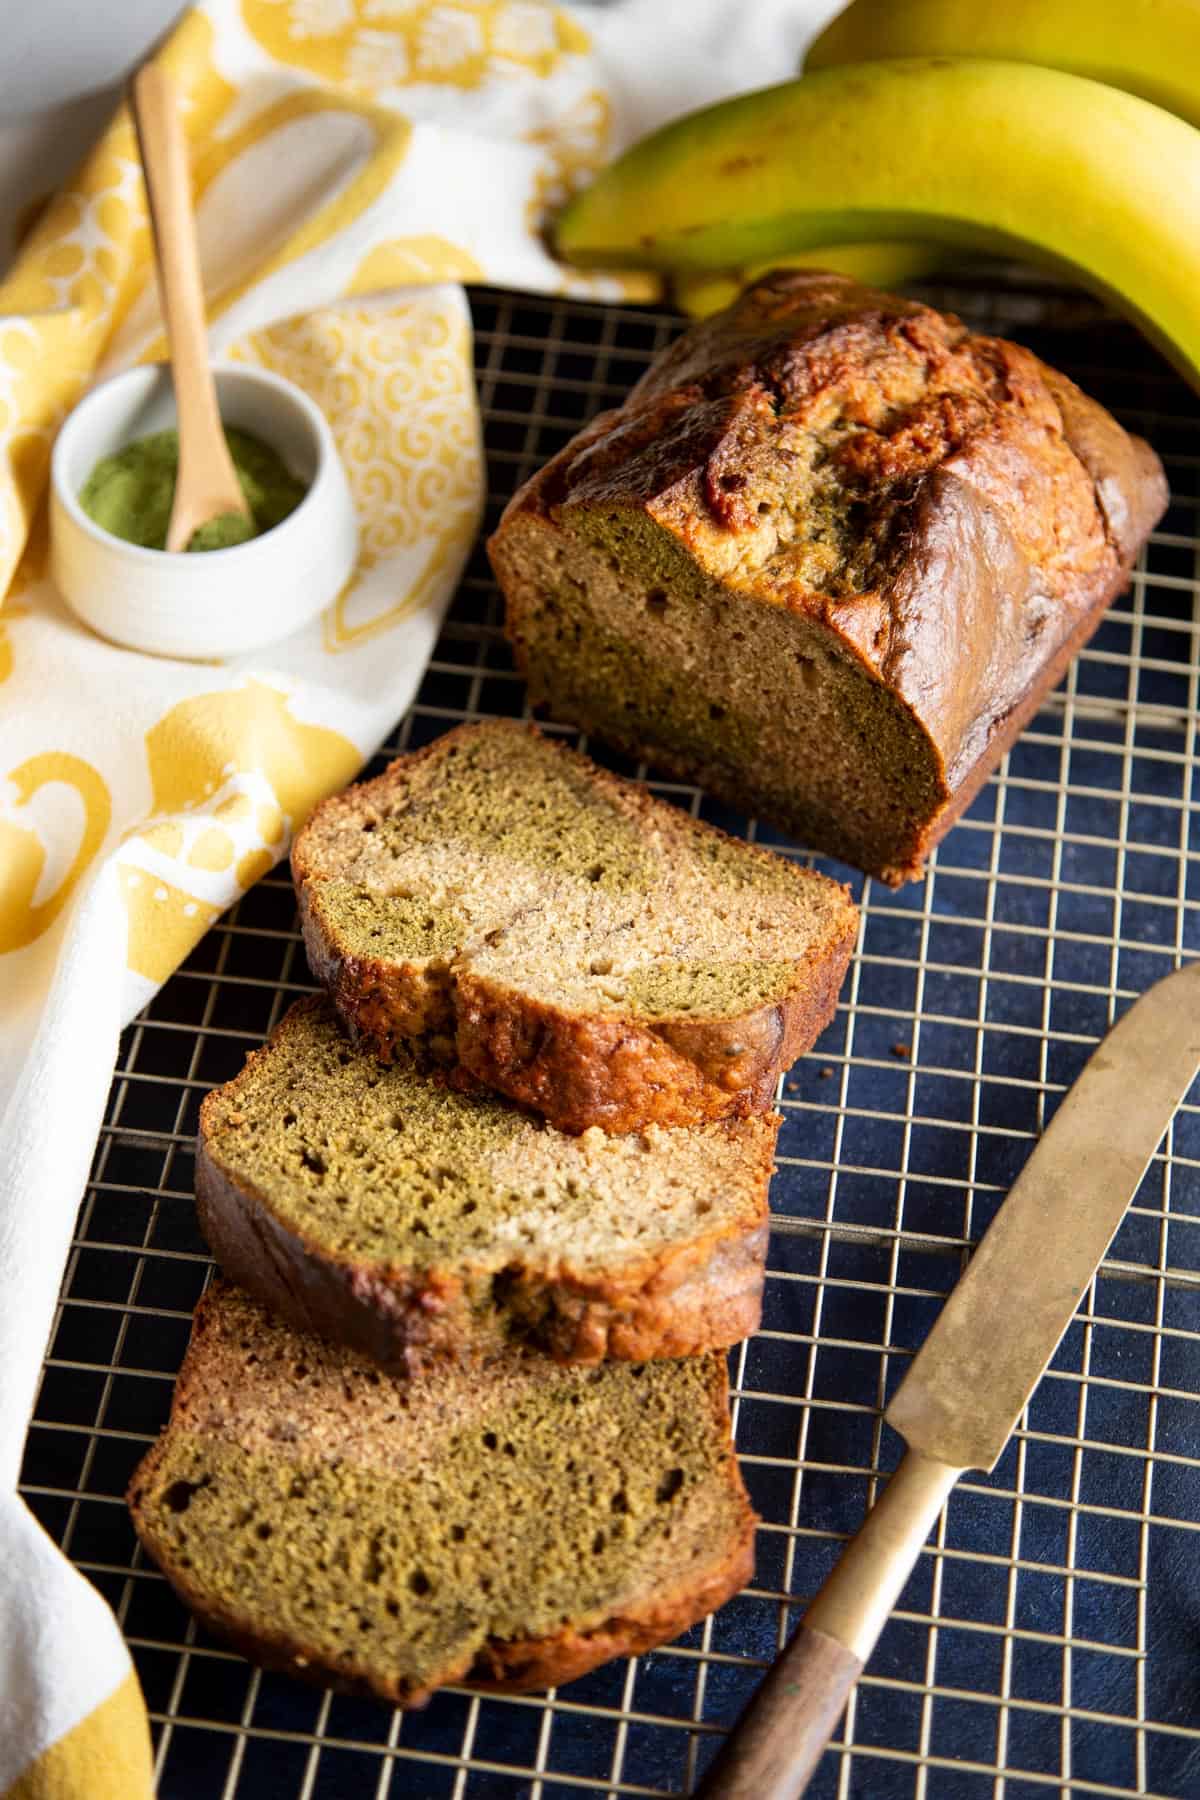 Slices of matcha banana bread next to half a loaf.